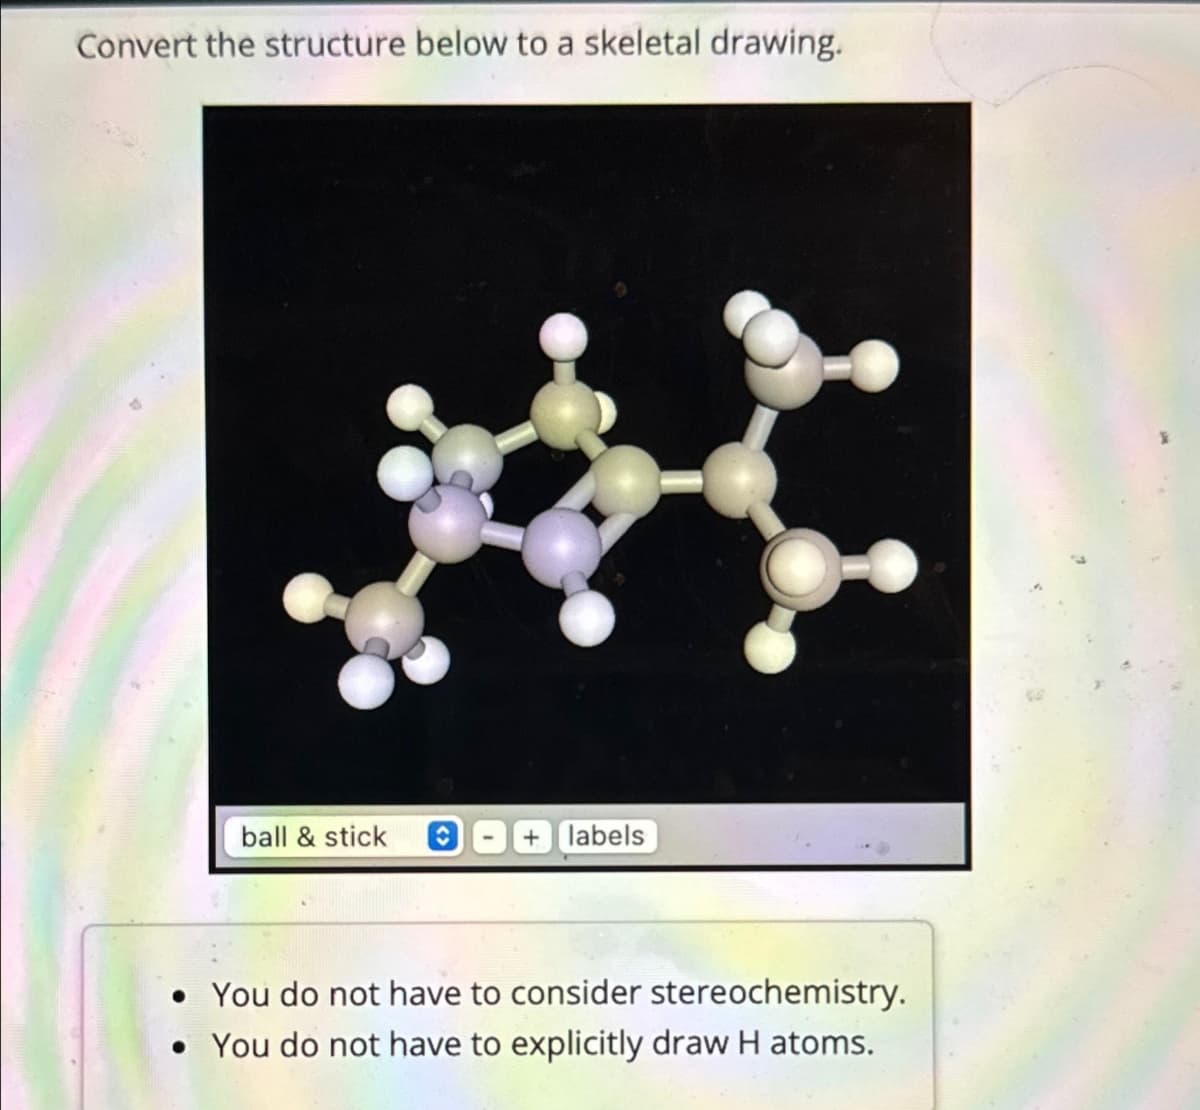 Convert the structure below to a skeletal drawing.
ball & stick
labels
• You do not have to consider stereochemistry.
• You do not have to explicitly draw H atoms.